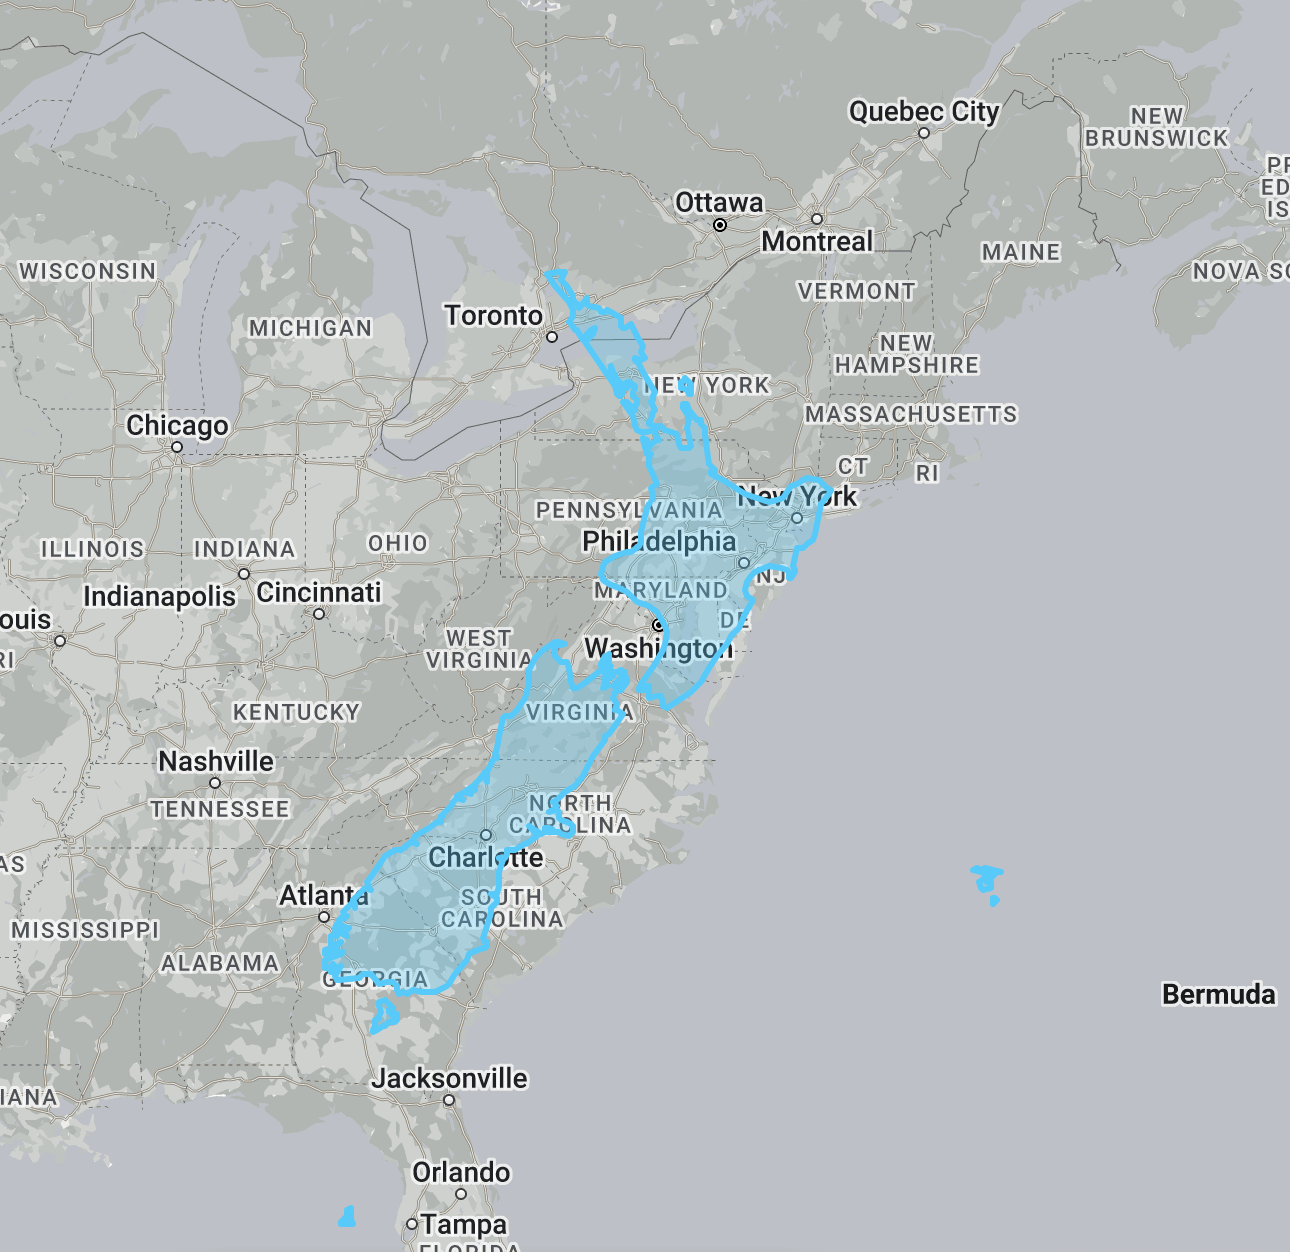 the outline of New Zealand photoshopped on top of the US east coast states, going into Canada